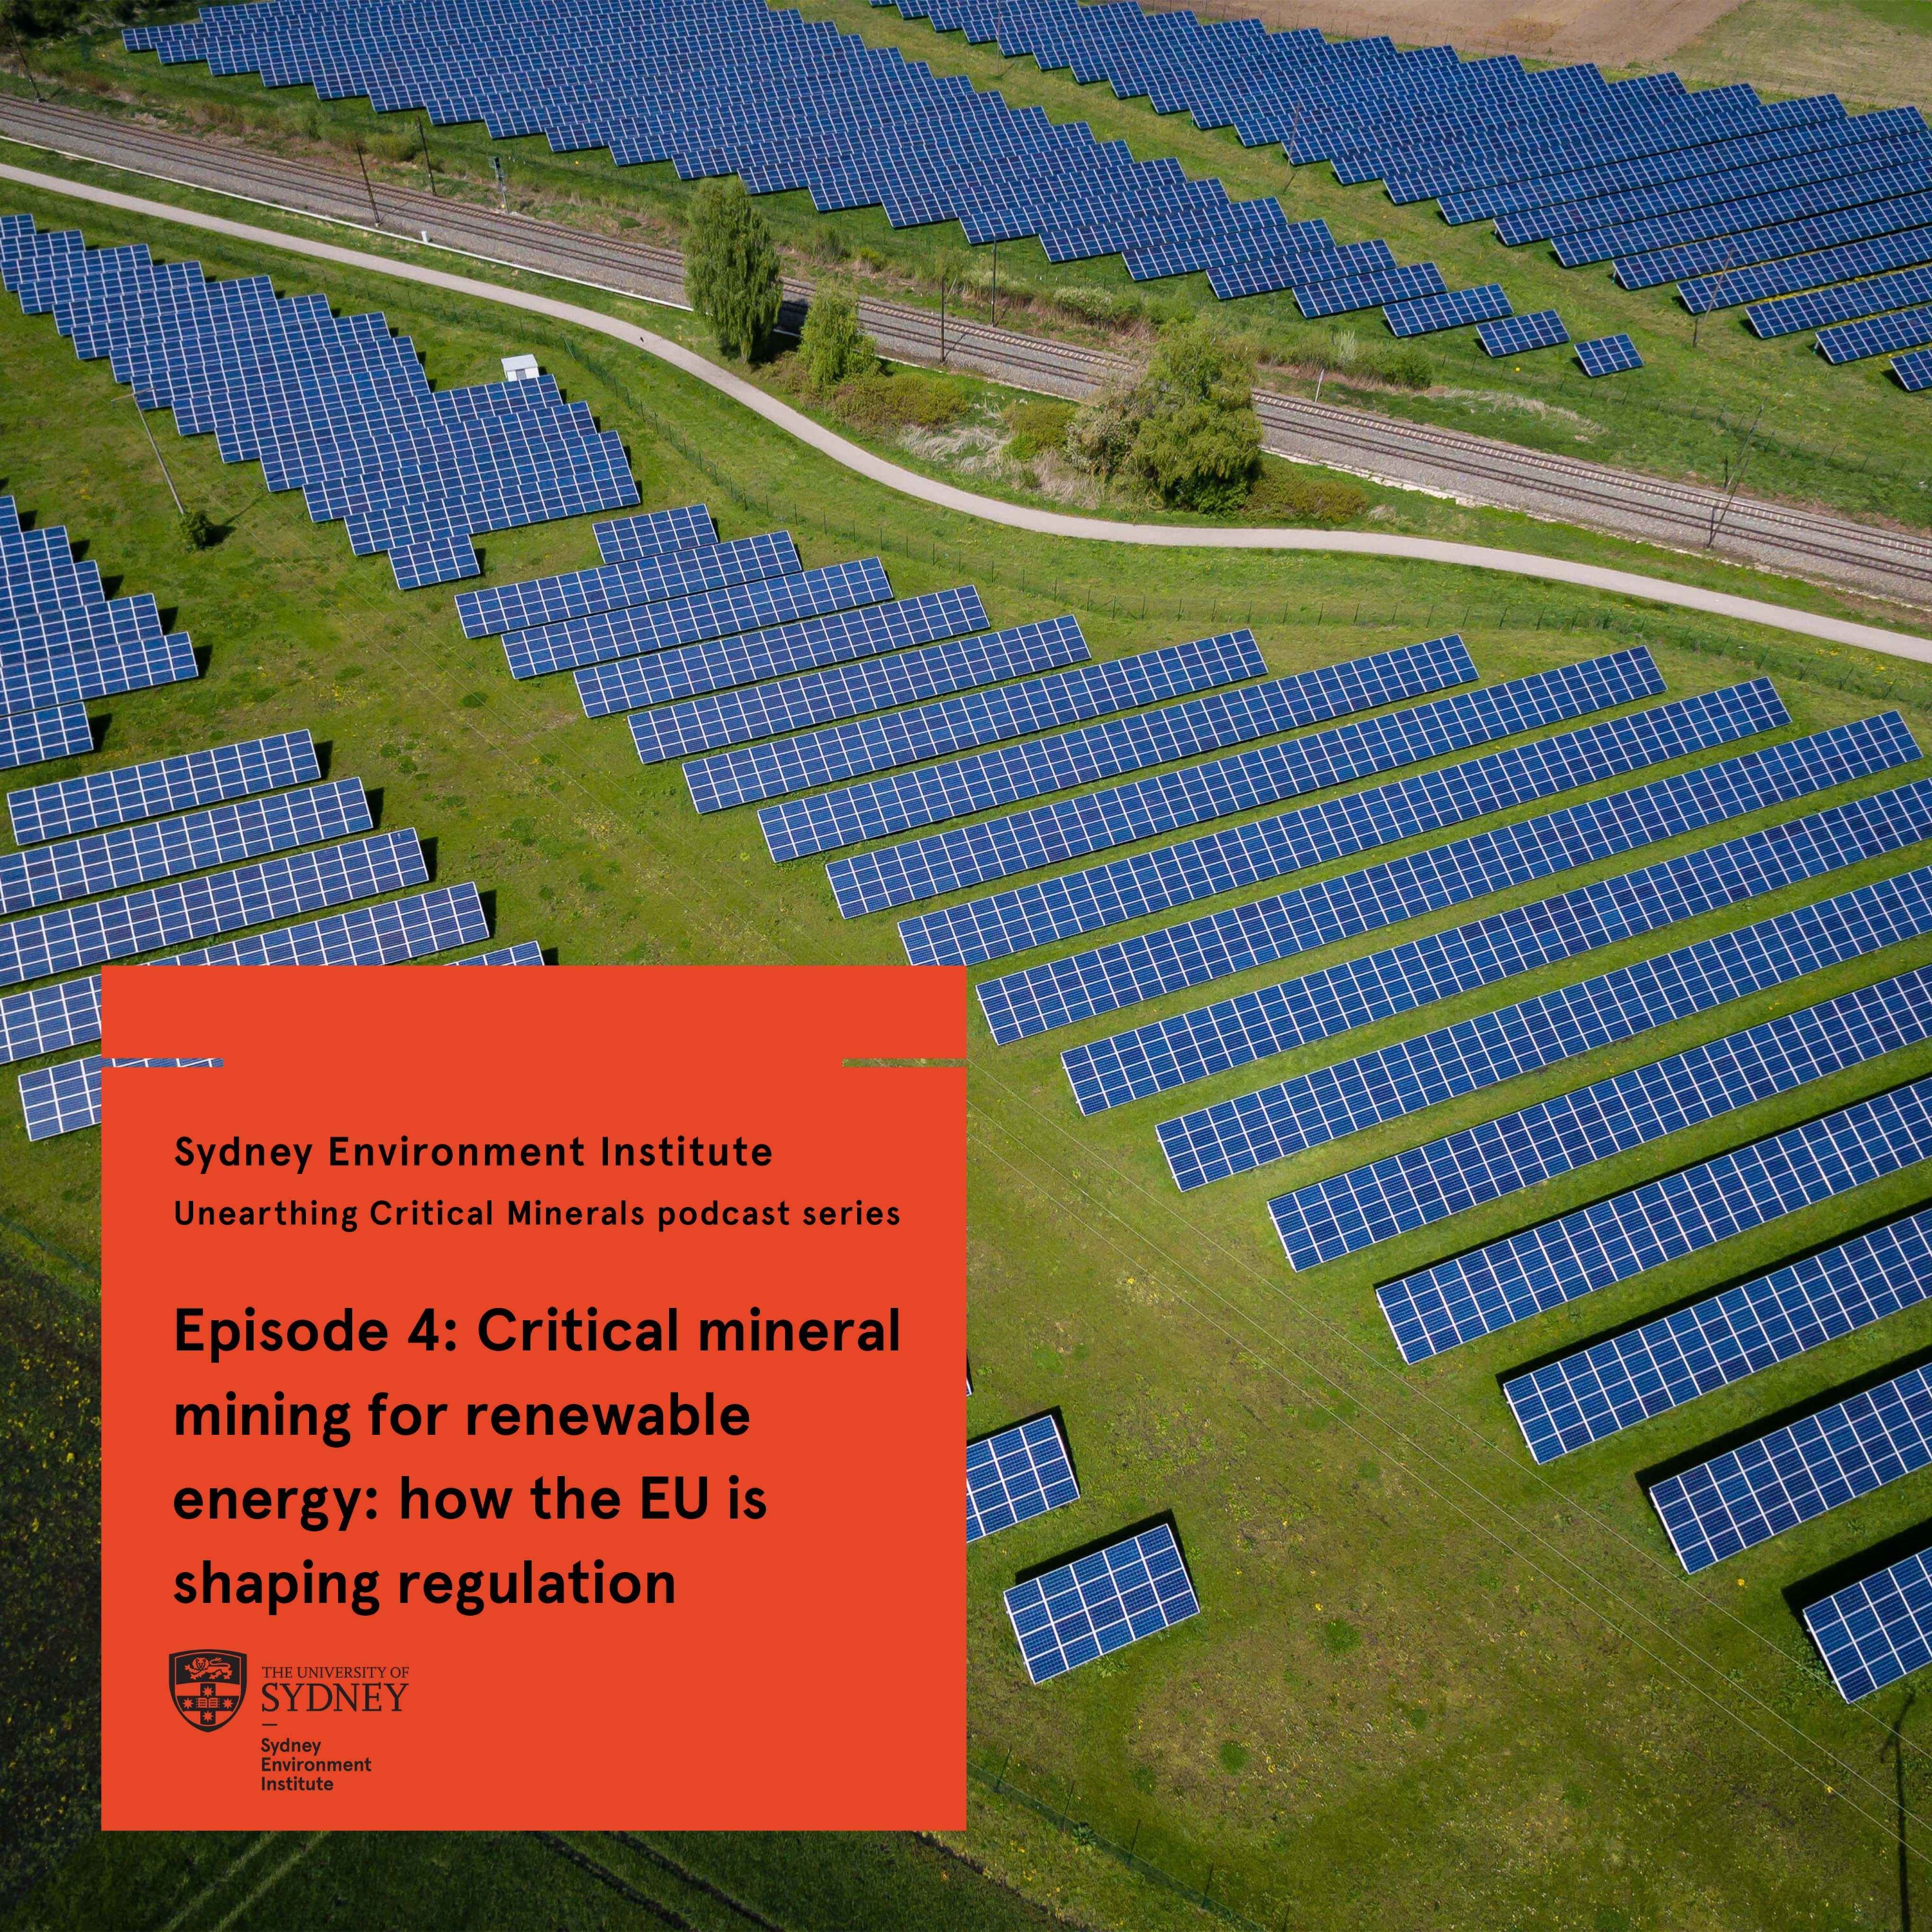 Episode 4: Critical mineral mining for renewable energy: how the EU is shaping regulation